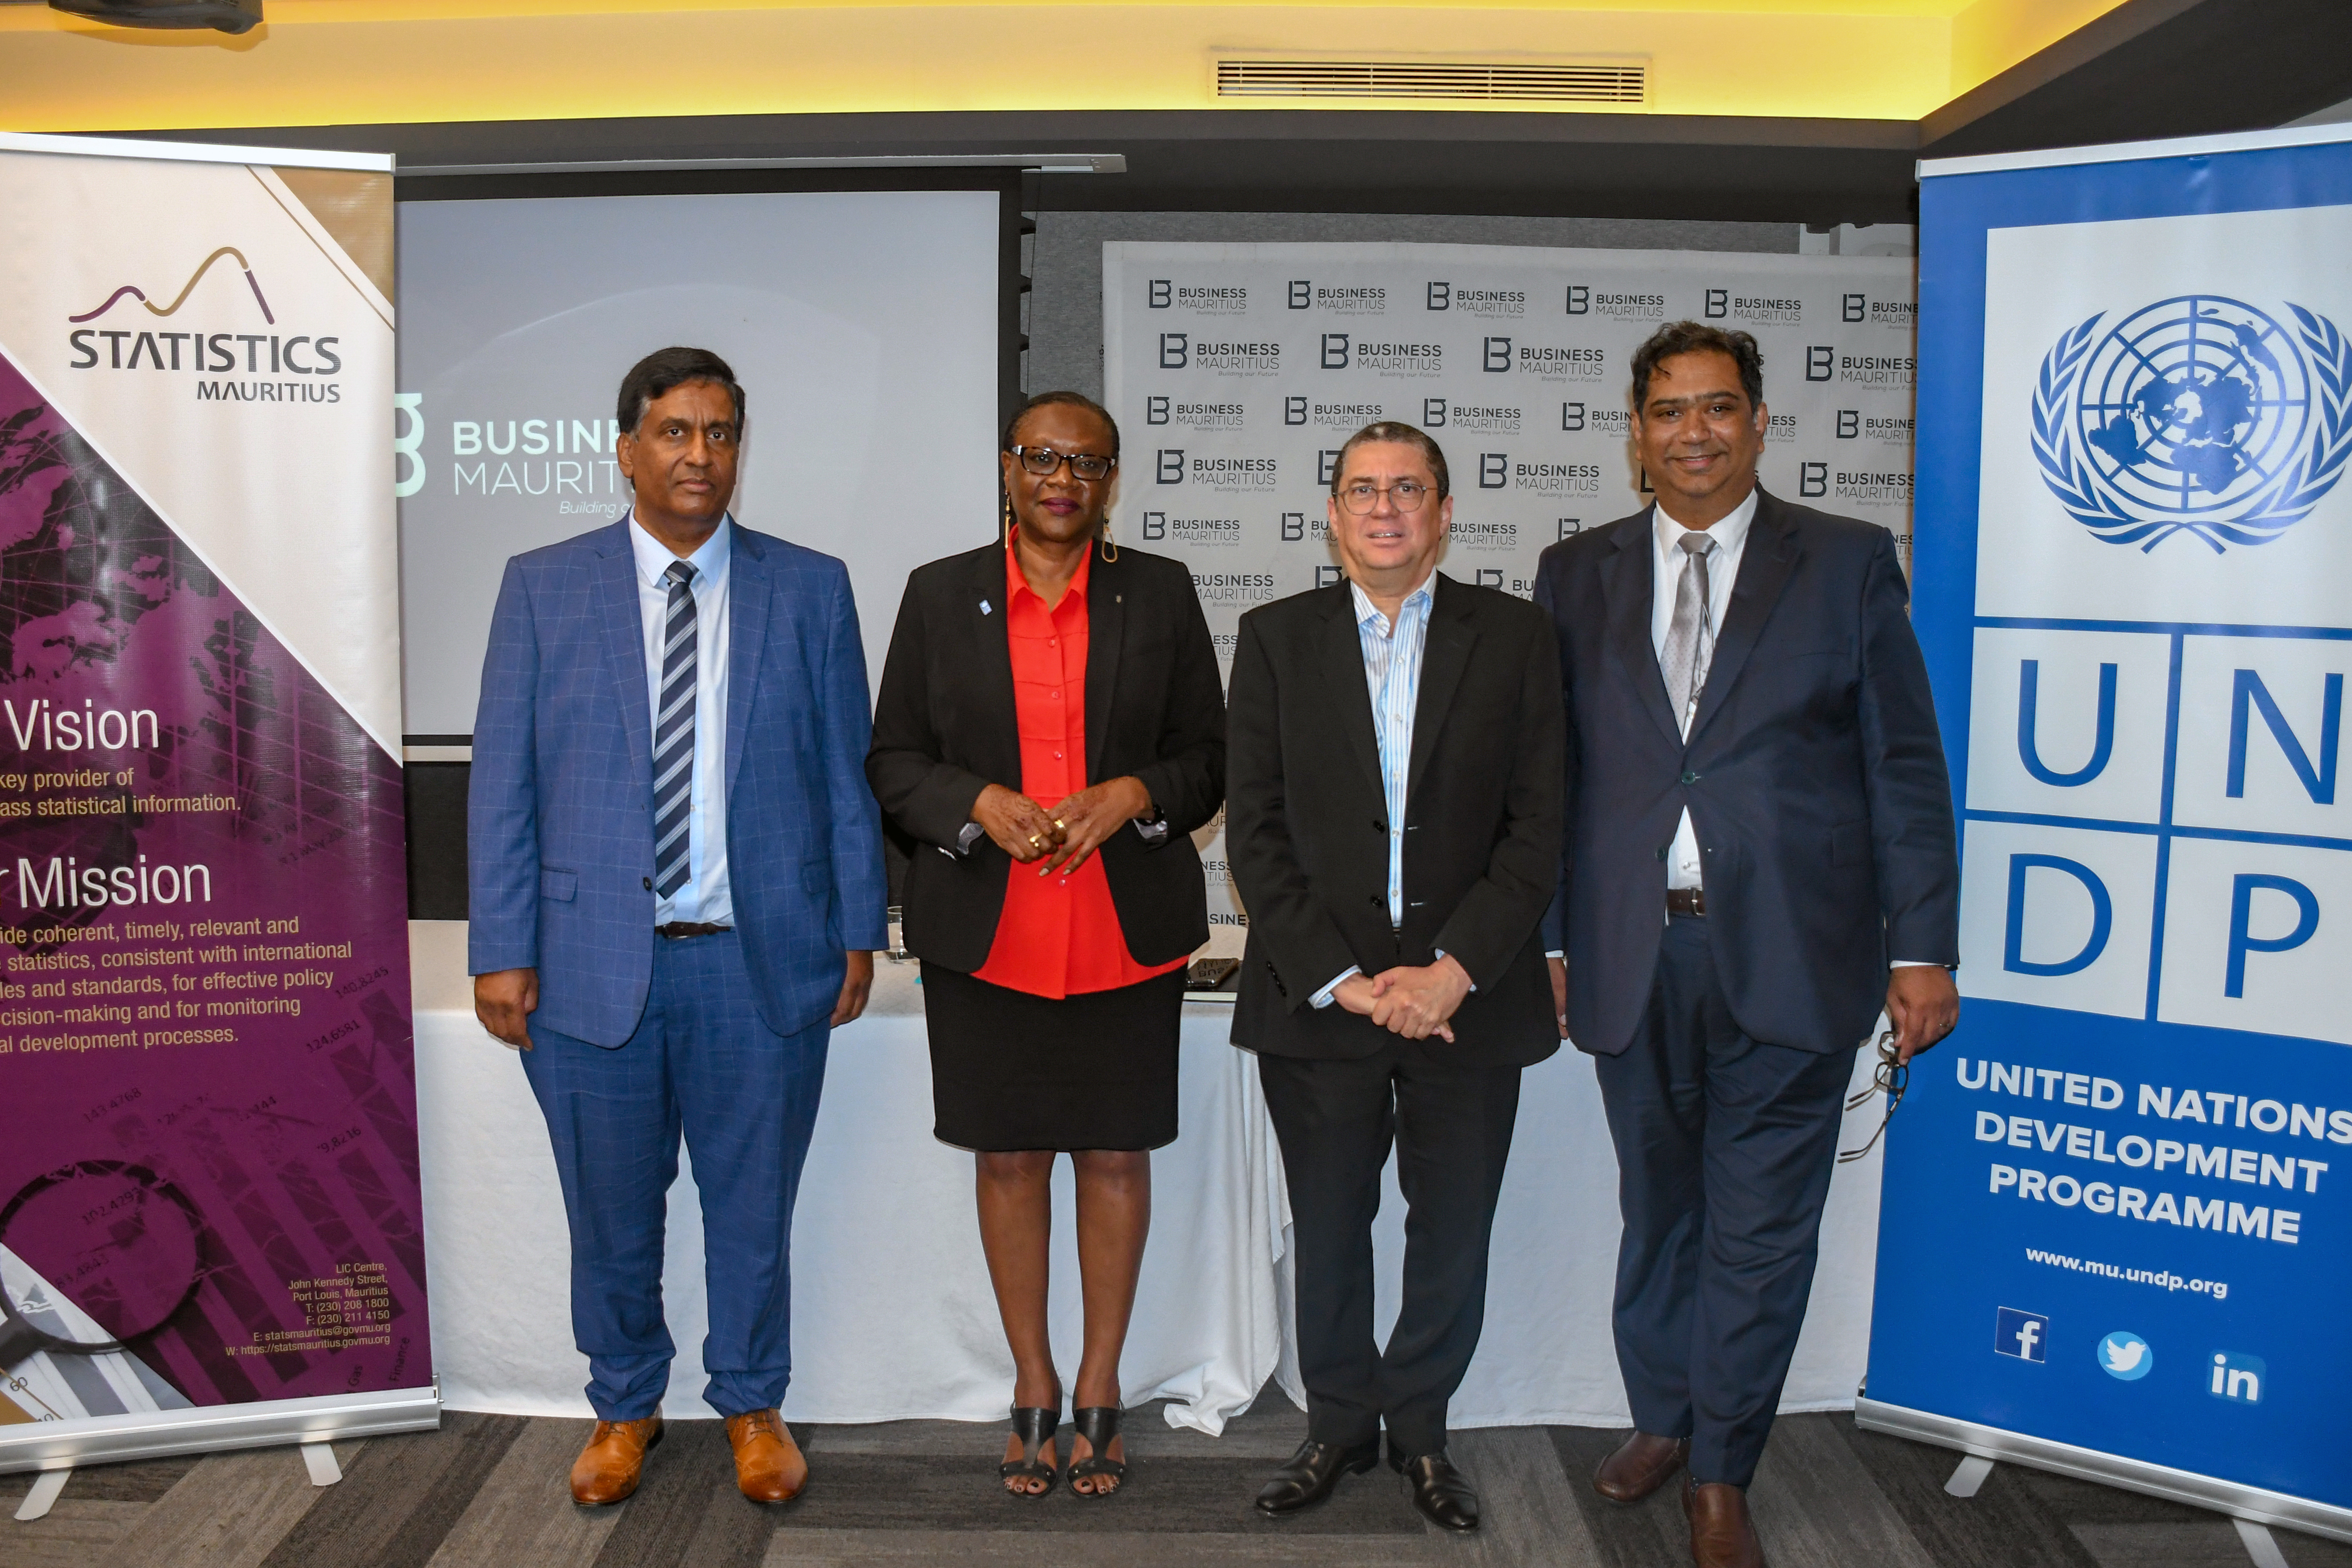 From left to right: Mr Mukesh Dawoonauth, Acting Director General of Statistics Mauritius, Ms. Amanda Serumaga, UNDP Mauritius and Seychelles resident Representative; Gilbert GNANY, MCB Group Chief Strategy Officer and Kevin Ramkhelawon, CEO of Business Mauritius